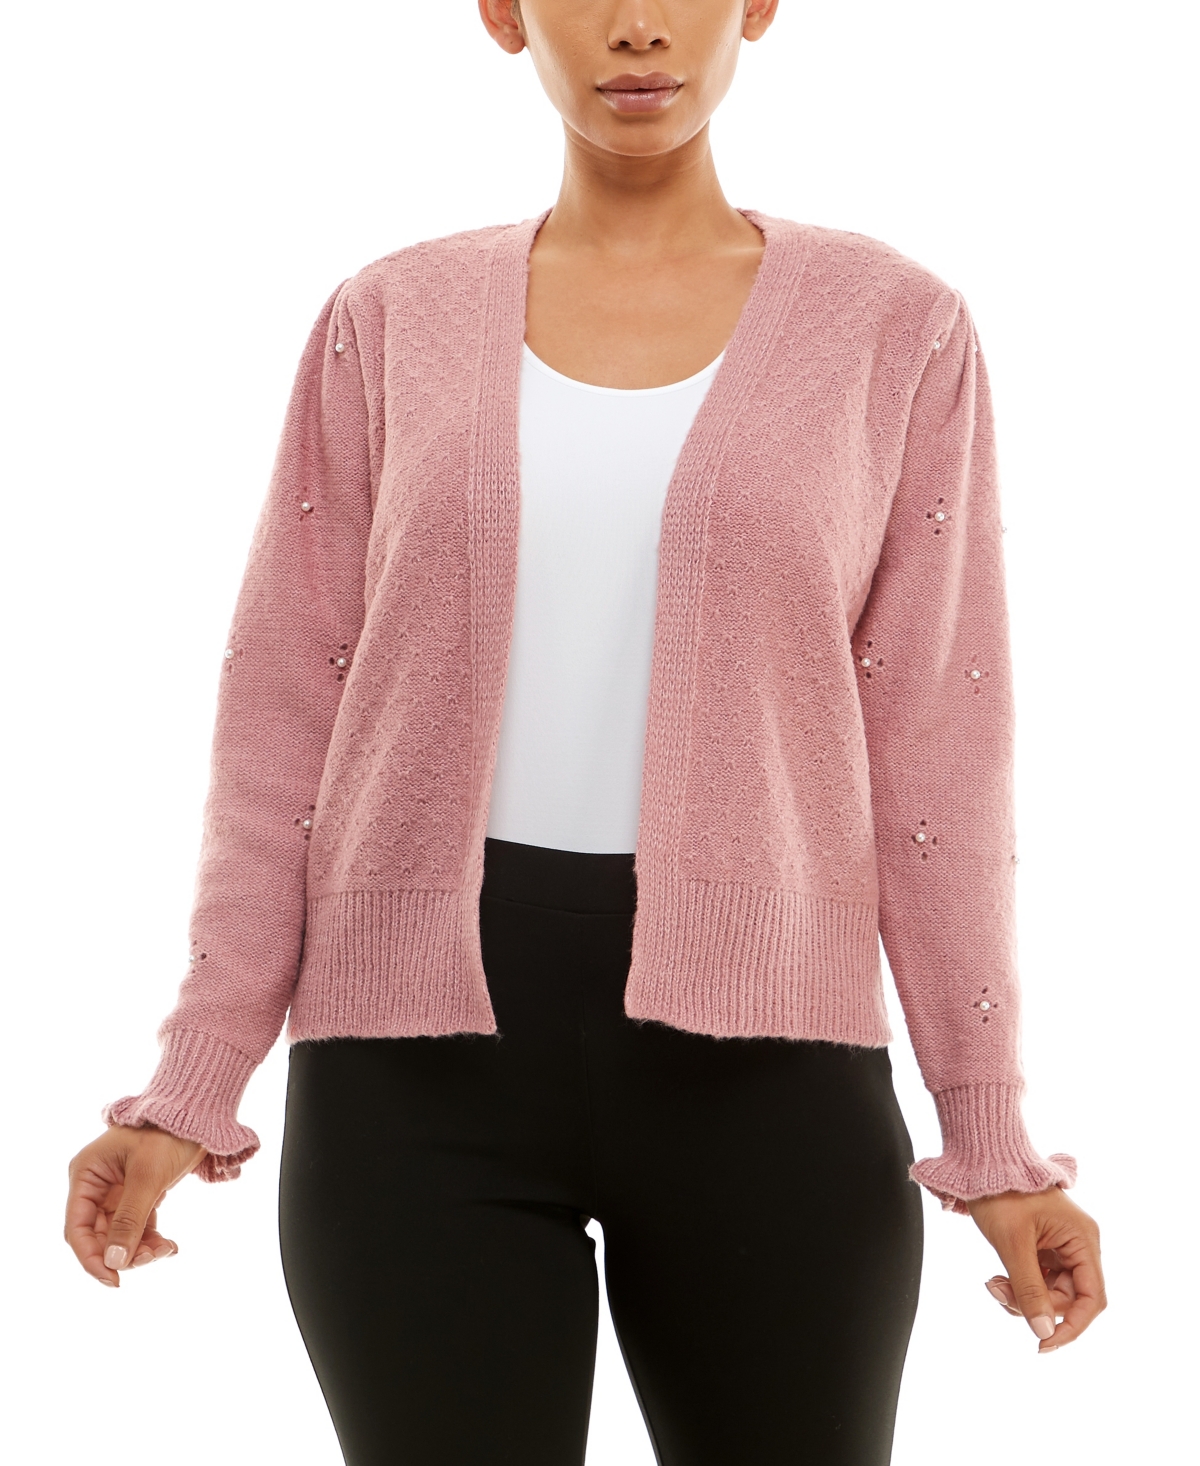 Adrienne Vittadini Women's Long Sleeve Novelty Stitch Front Sweater Cardigan With Imitation-pearls In Lilas